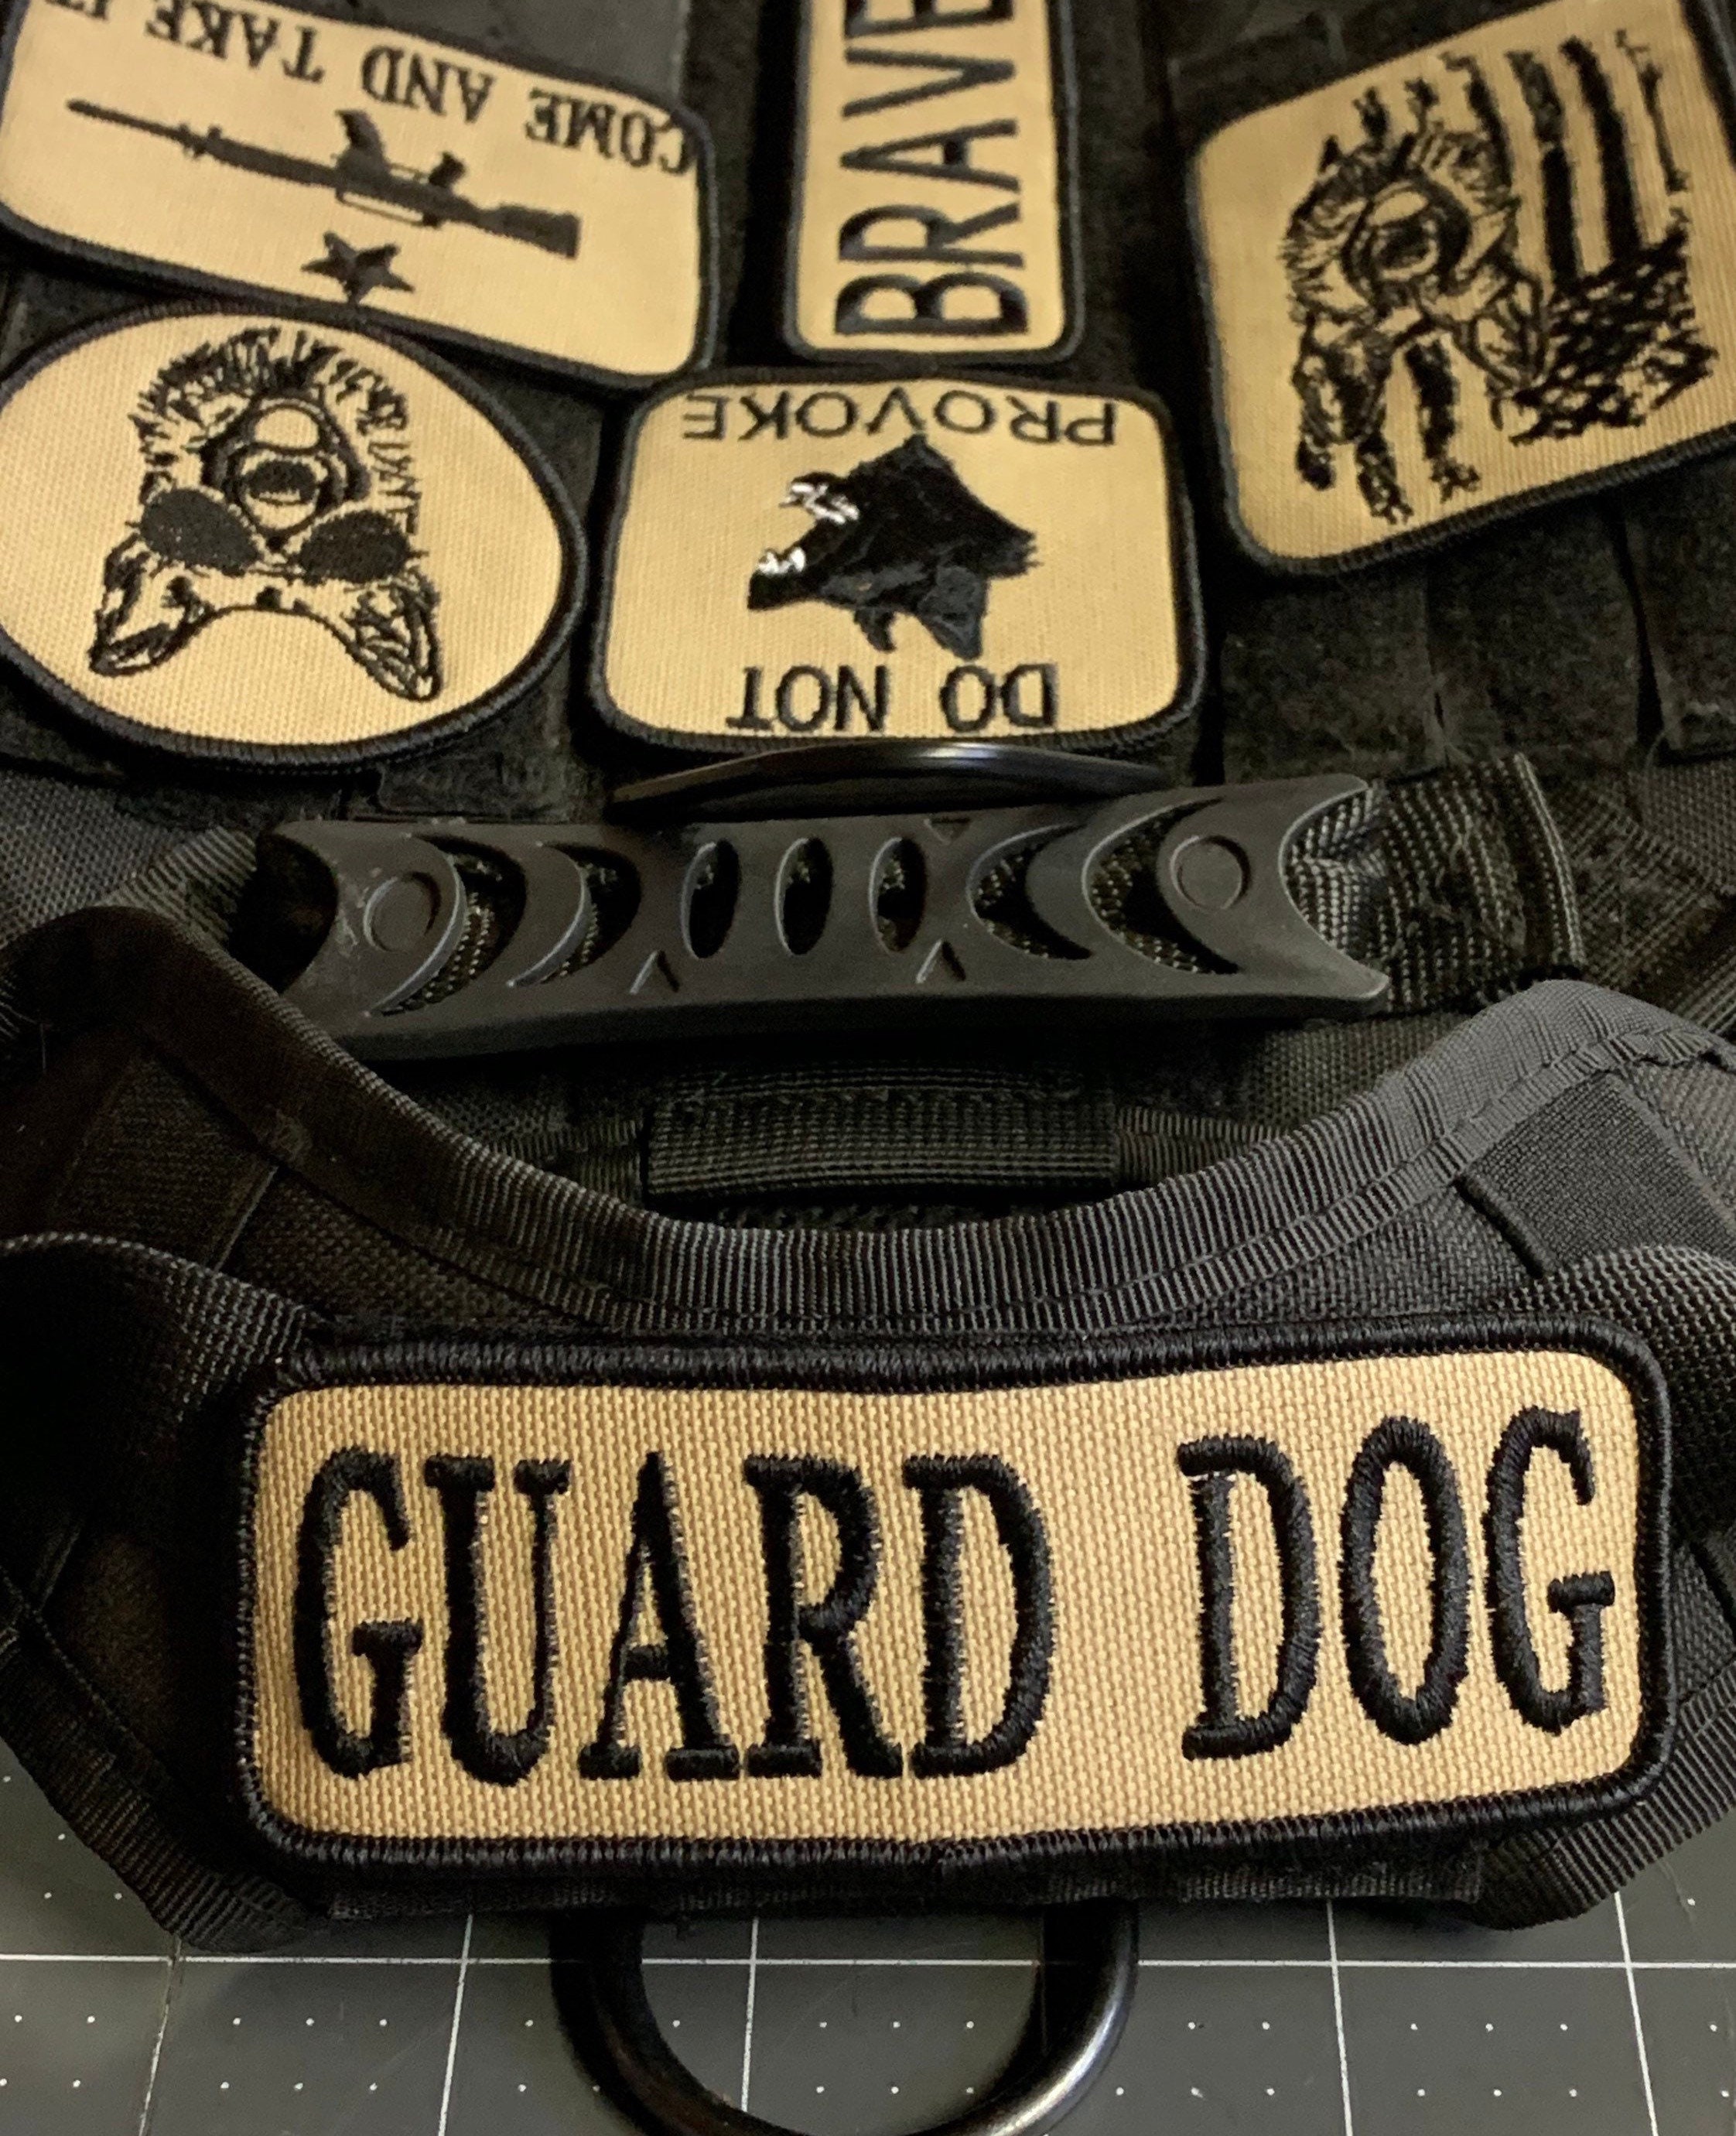 German Shepherd Patches Ready to Attach to Dog Vest / Harness. Dog Vest  Harness Patches, Do Not Provoke Patch, Guard Dog Patch 